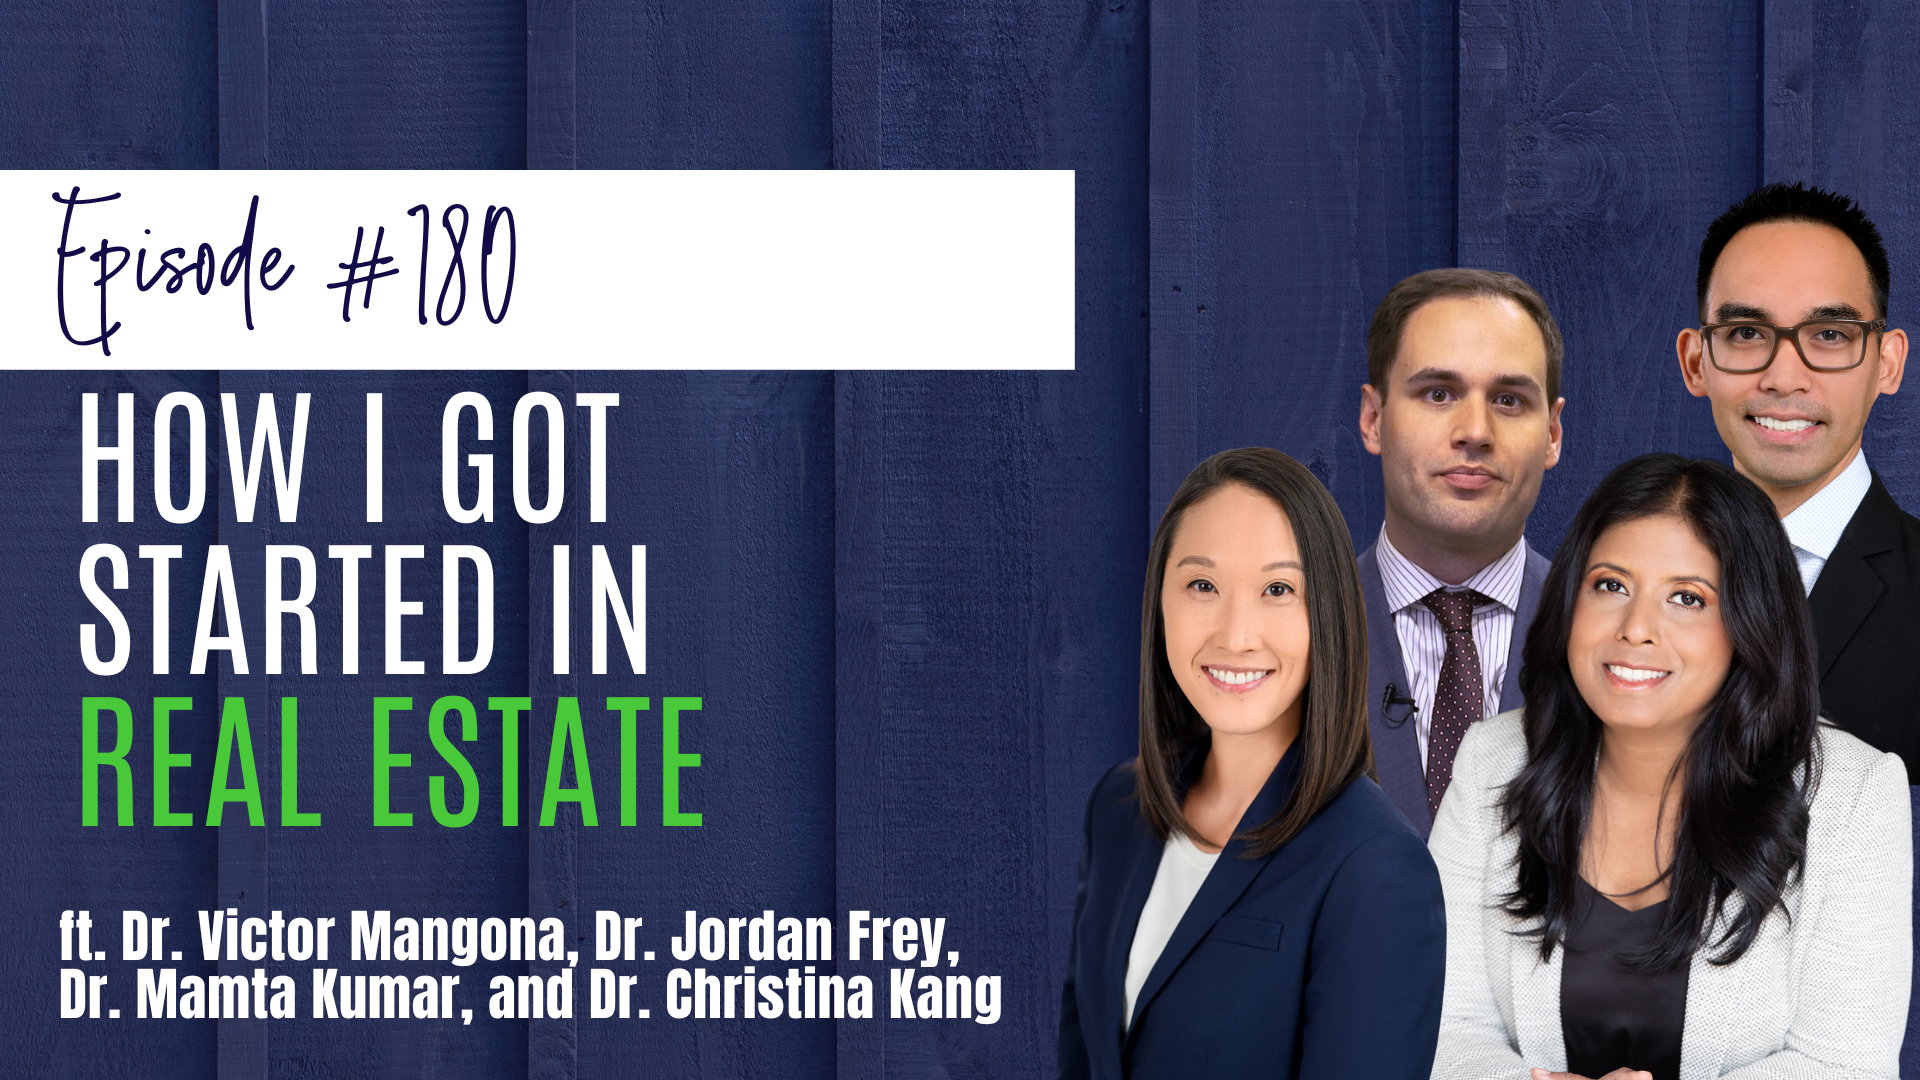 #180 How I Got Started in Real Estate - PIMDCON 2023